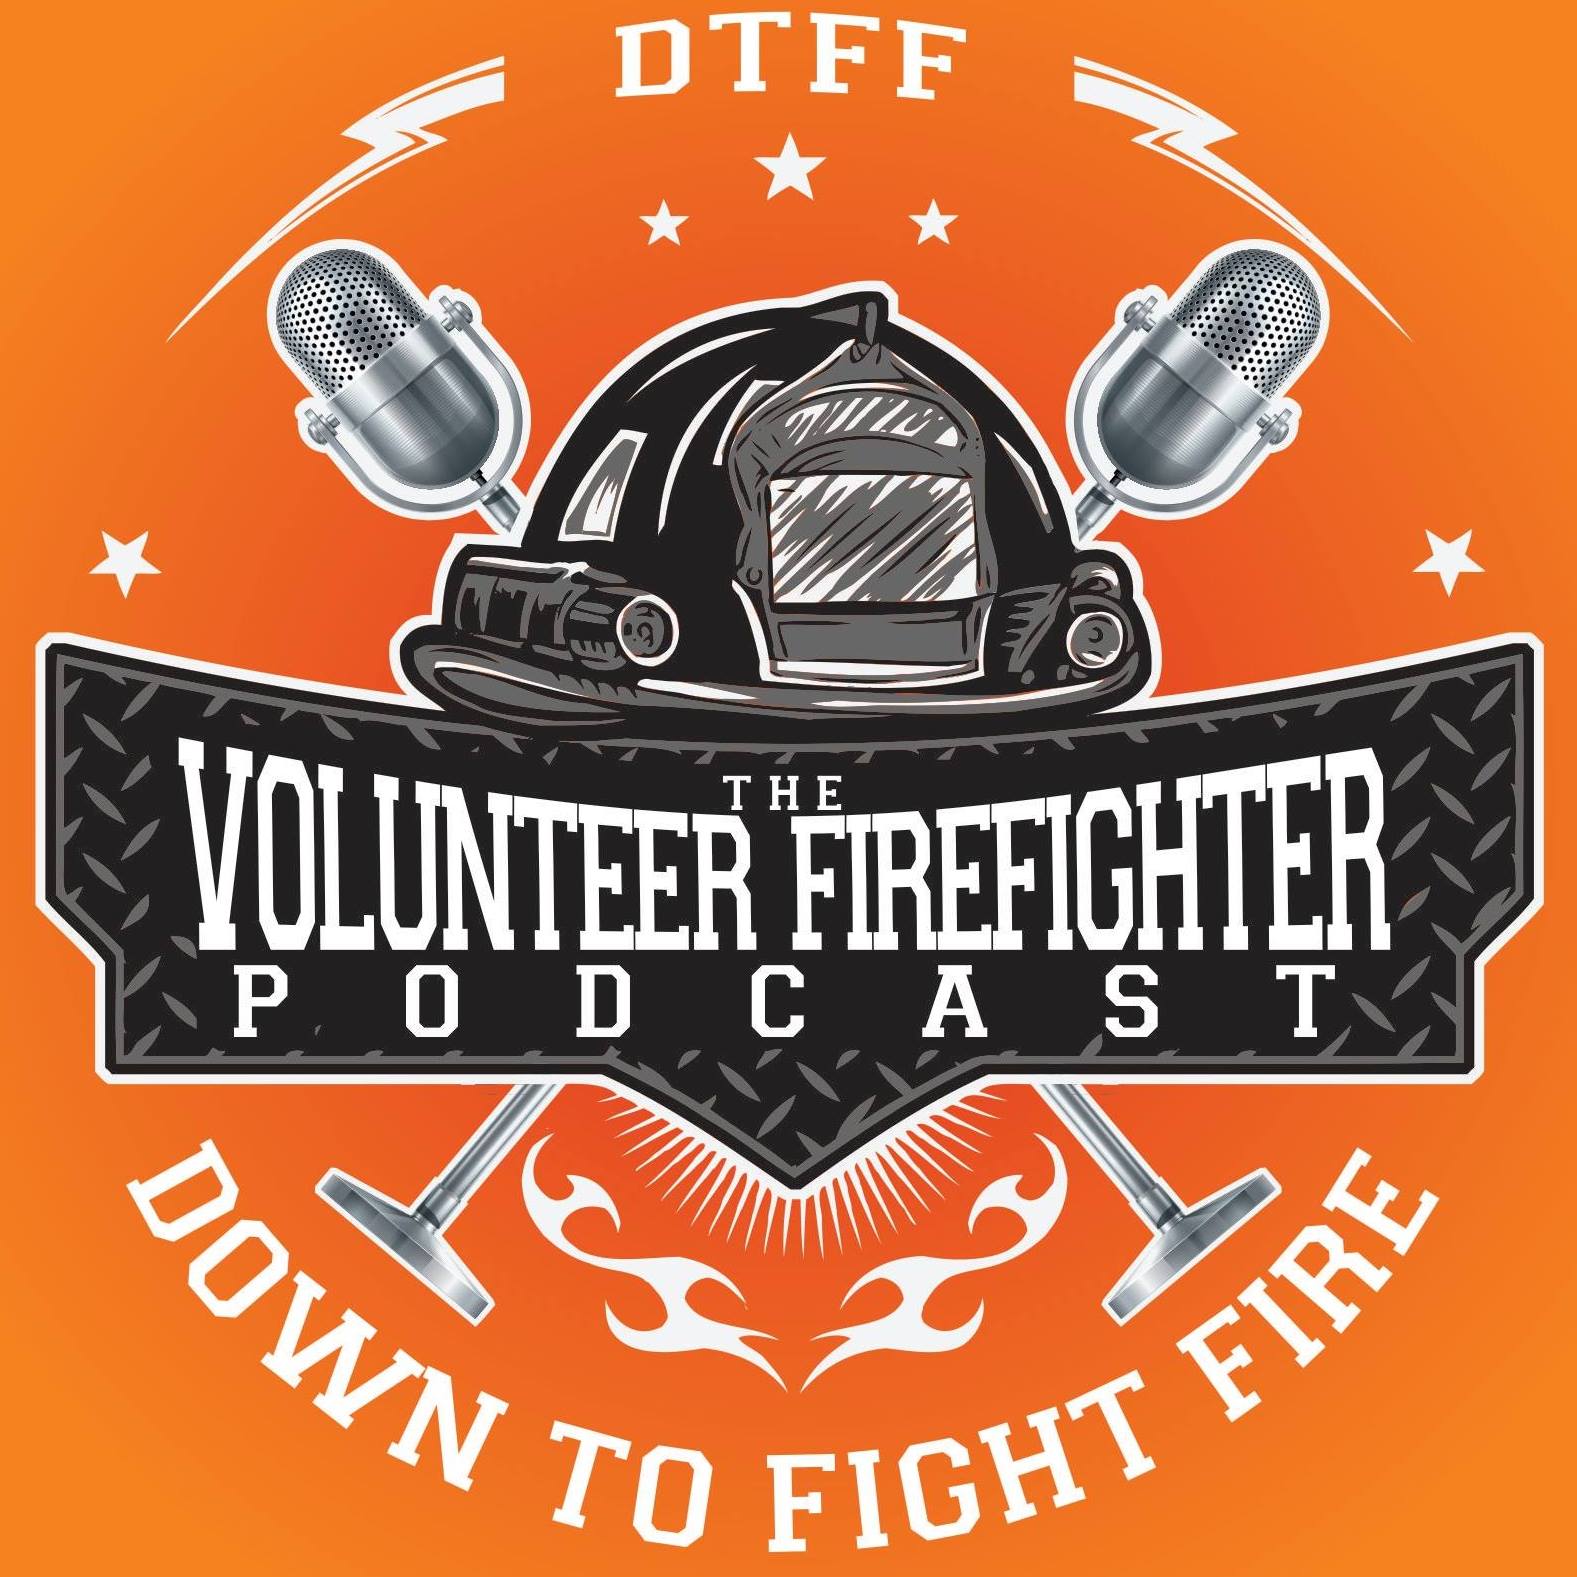 Are you Down To Fight Fire?  The Volunteer Firefighter Podcast.